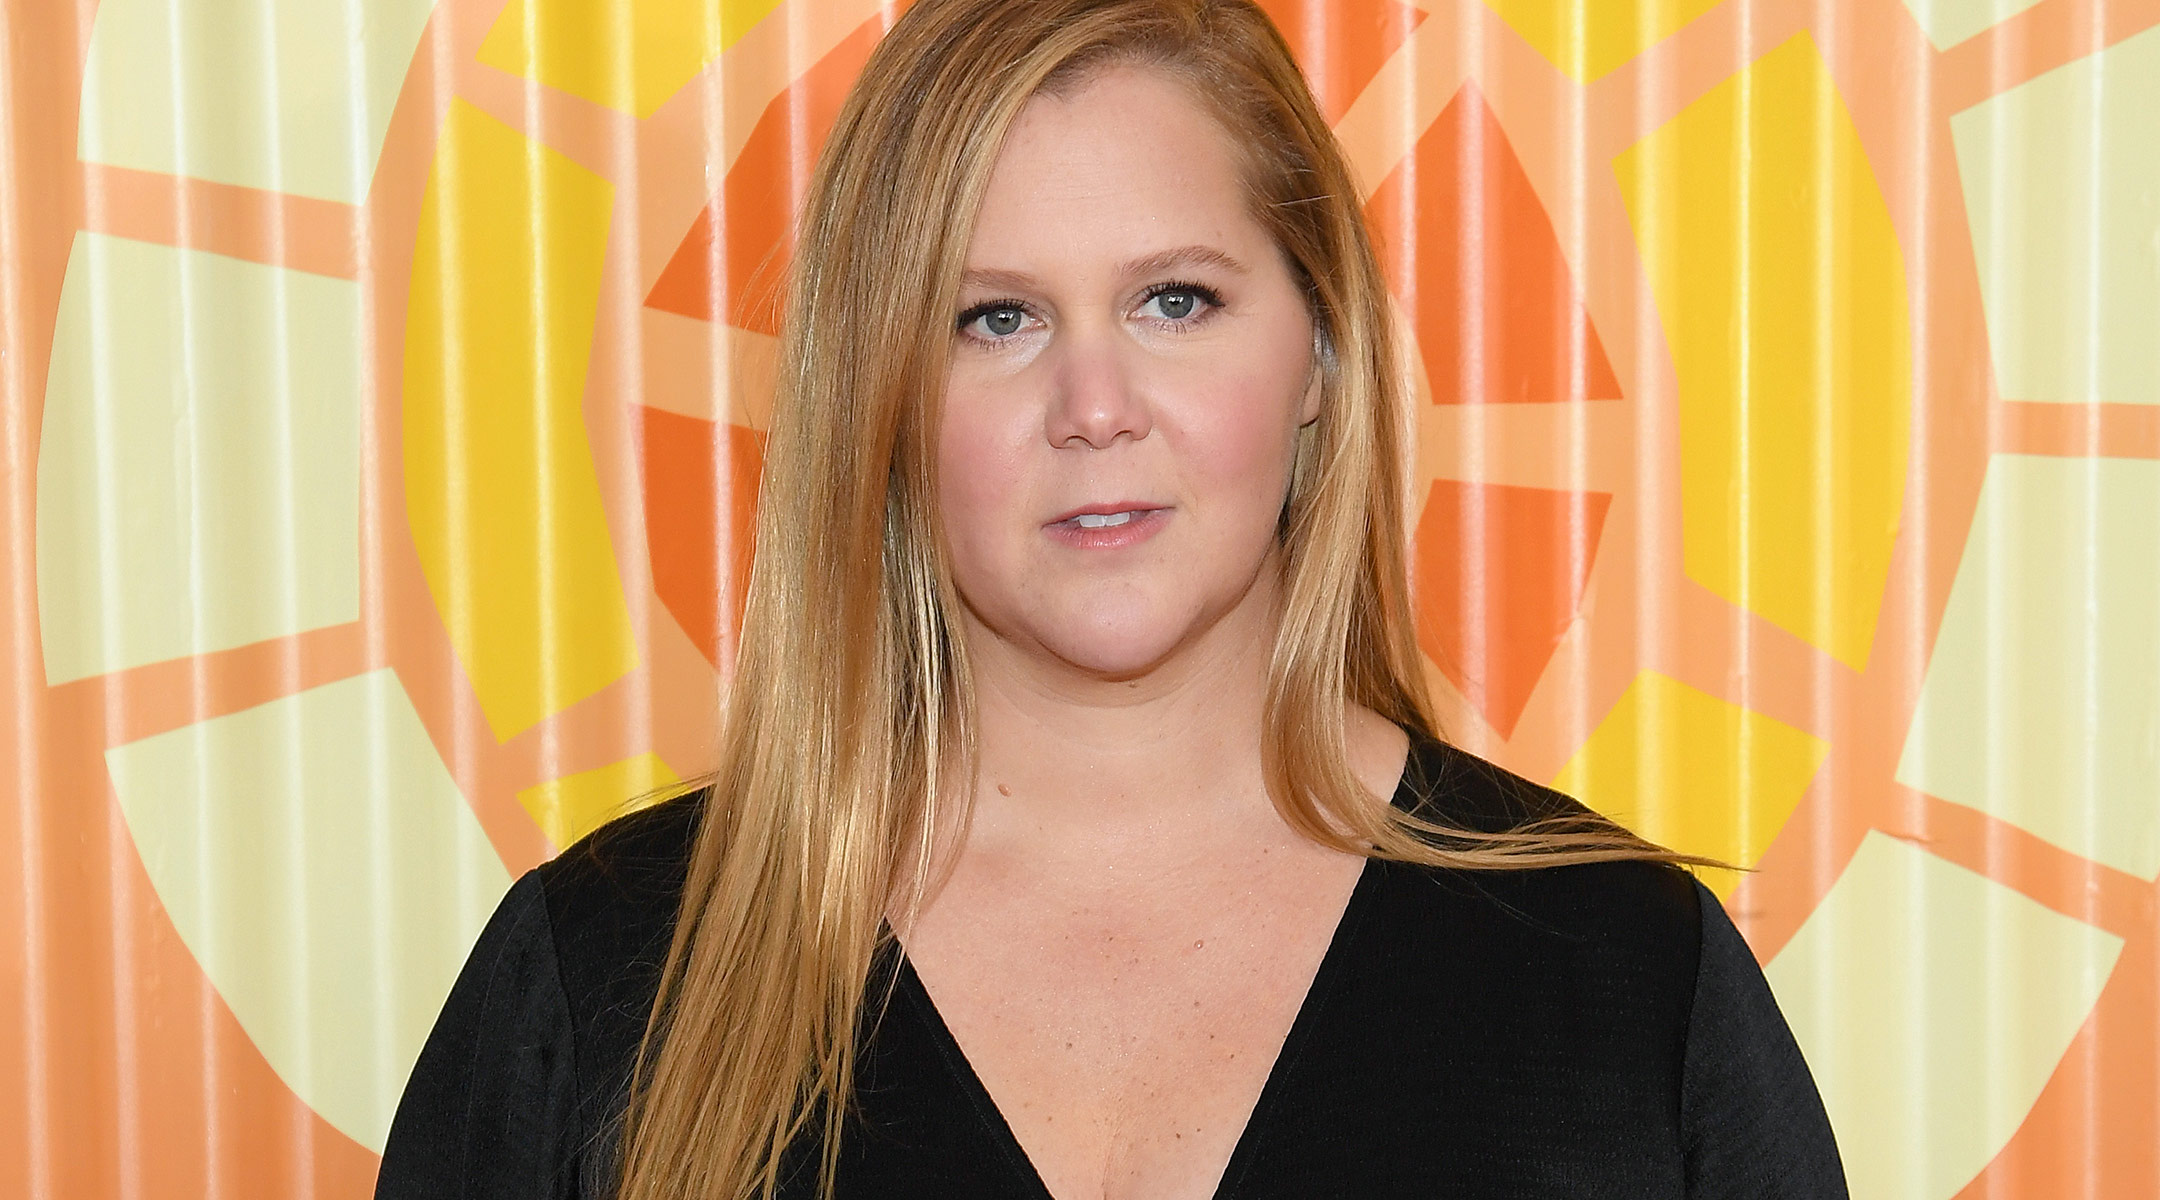 actress amy schumer posts about her egg retrieval procedure